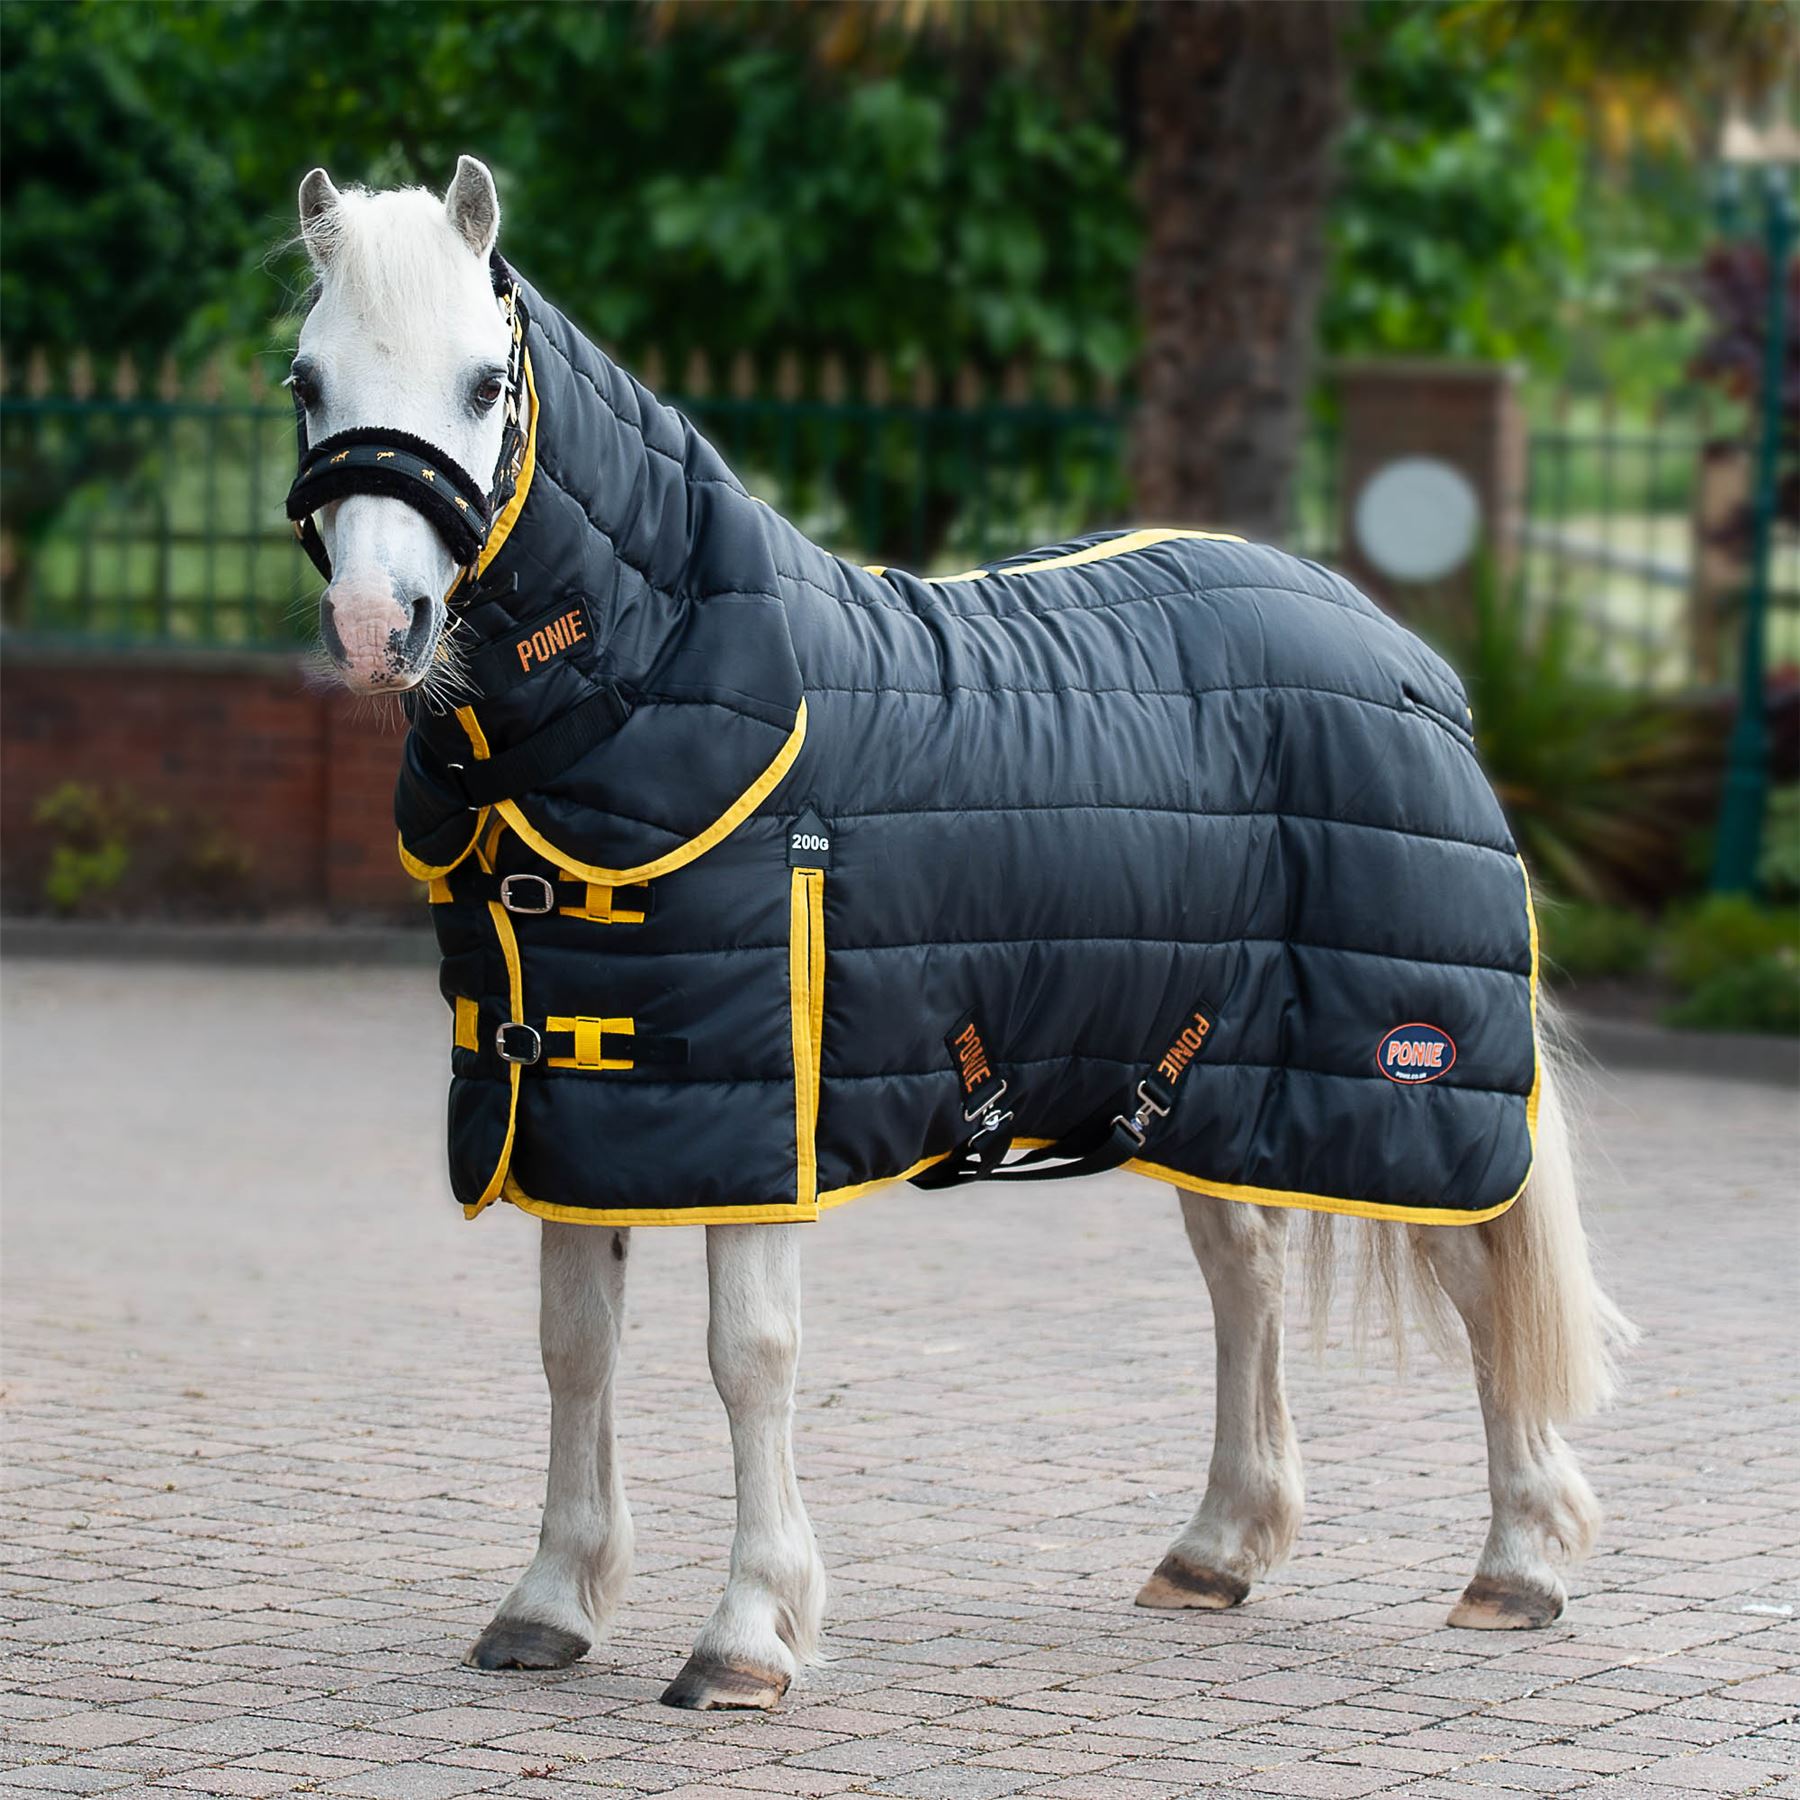 Gallop Equestrian Ponie 200 Stable Combo - Just Horse Riders